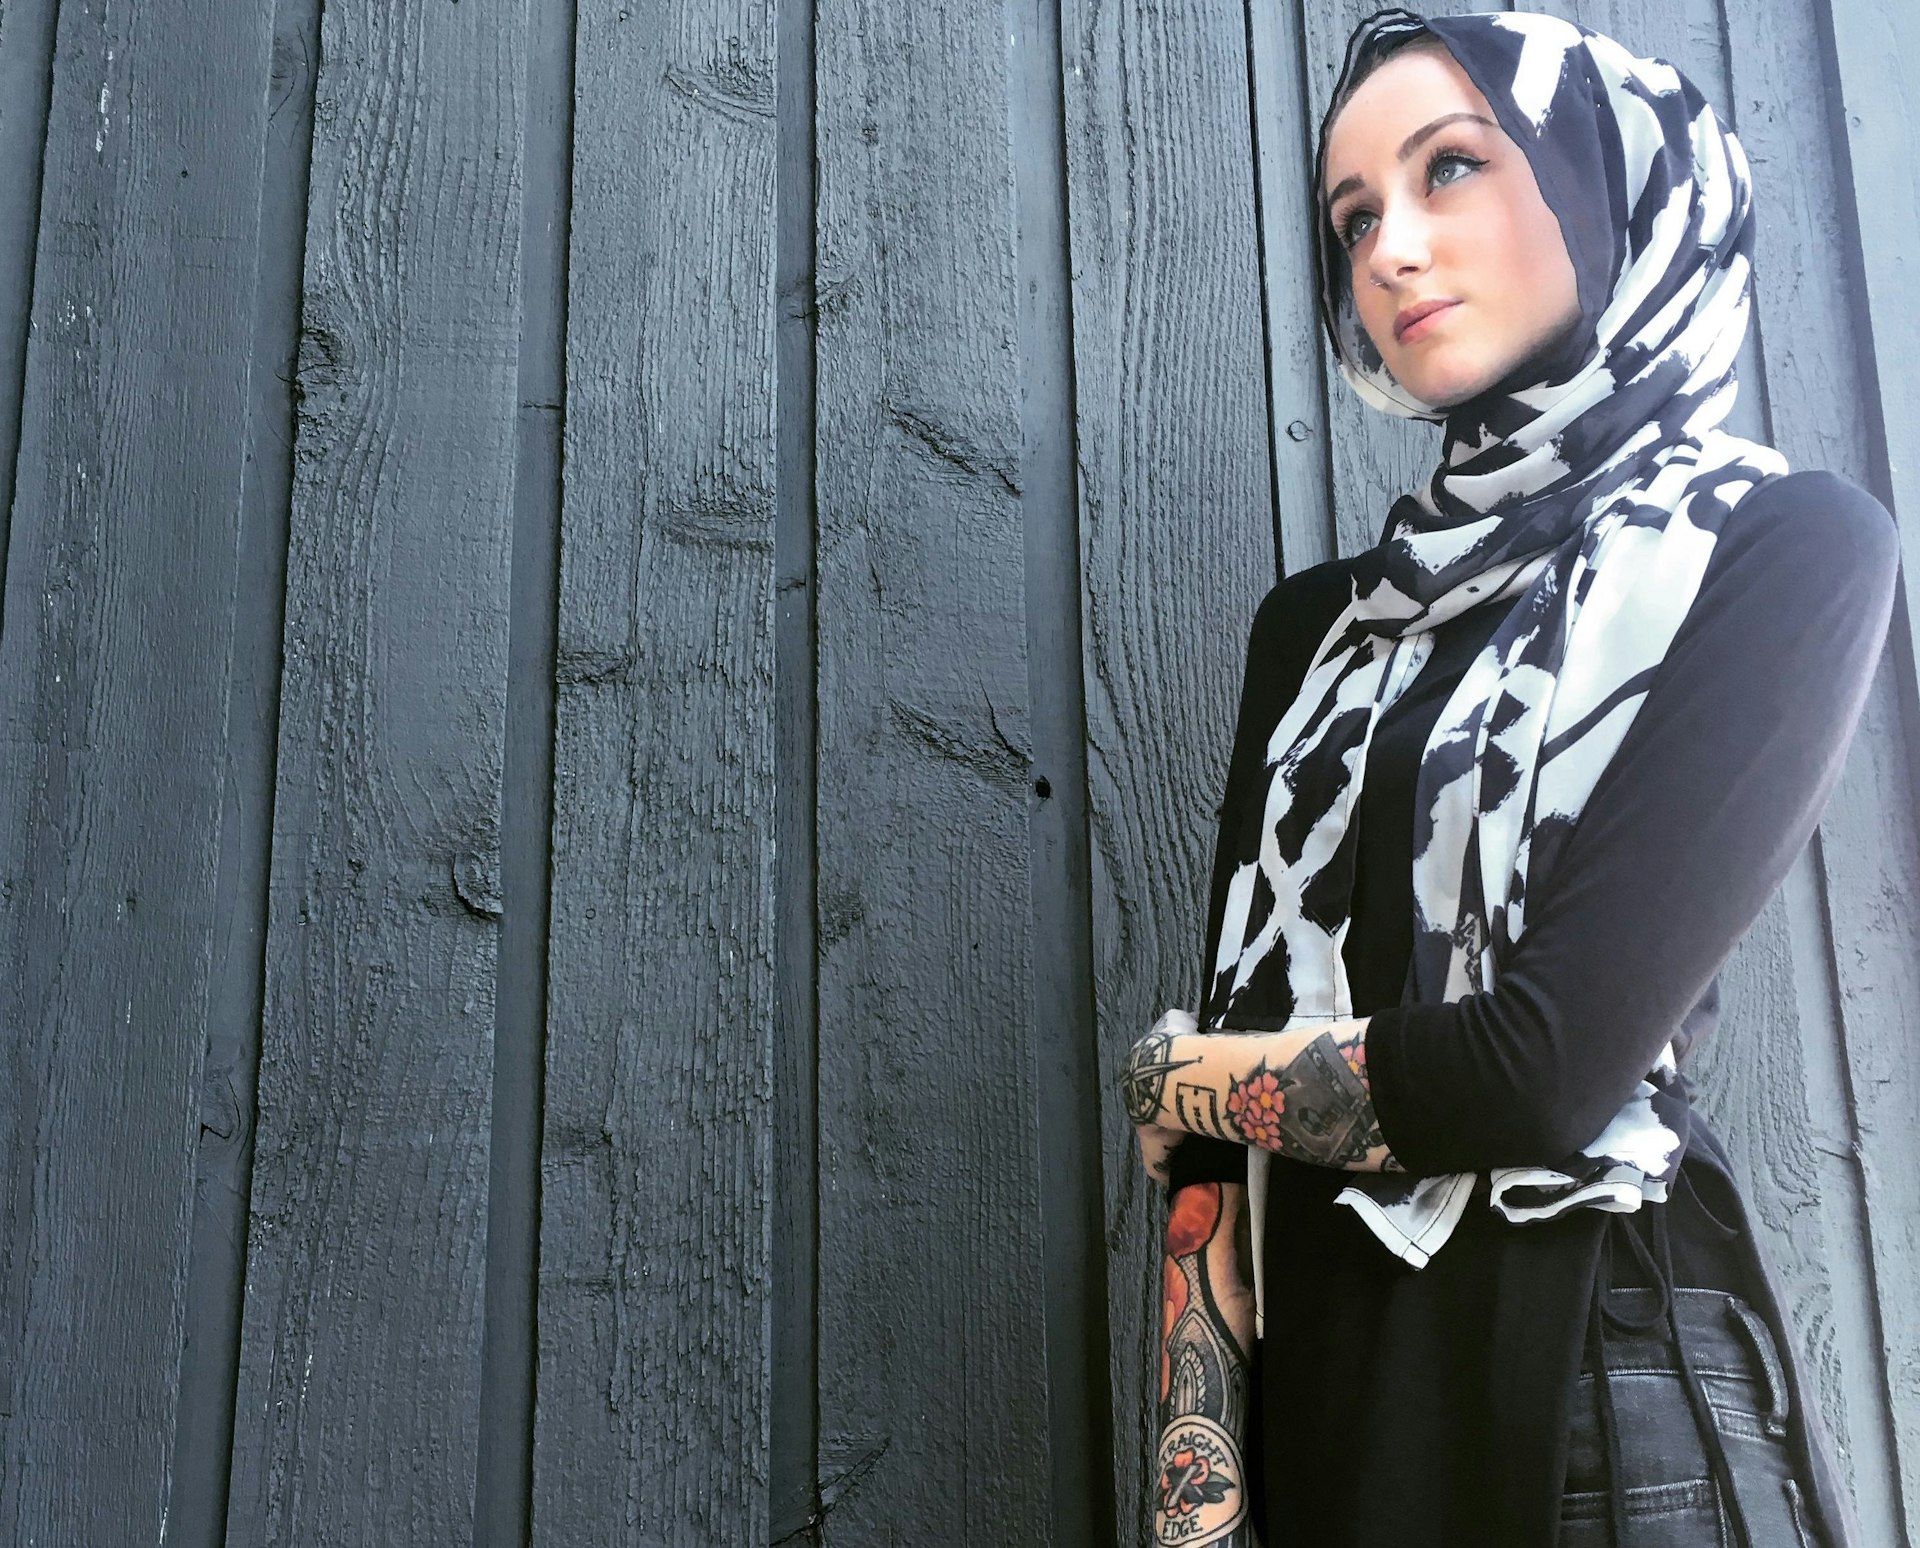 Confidently tattooed and unapologetically Muslim